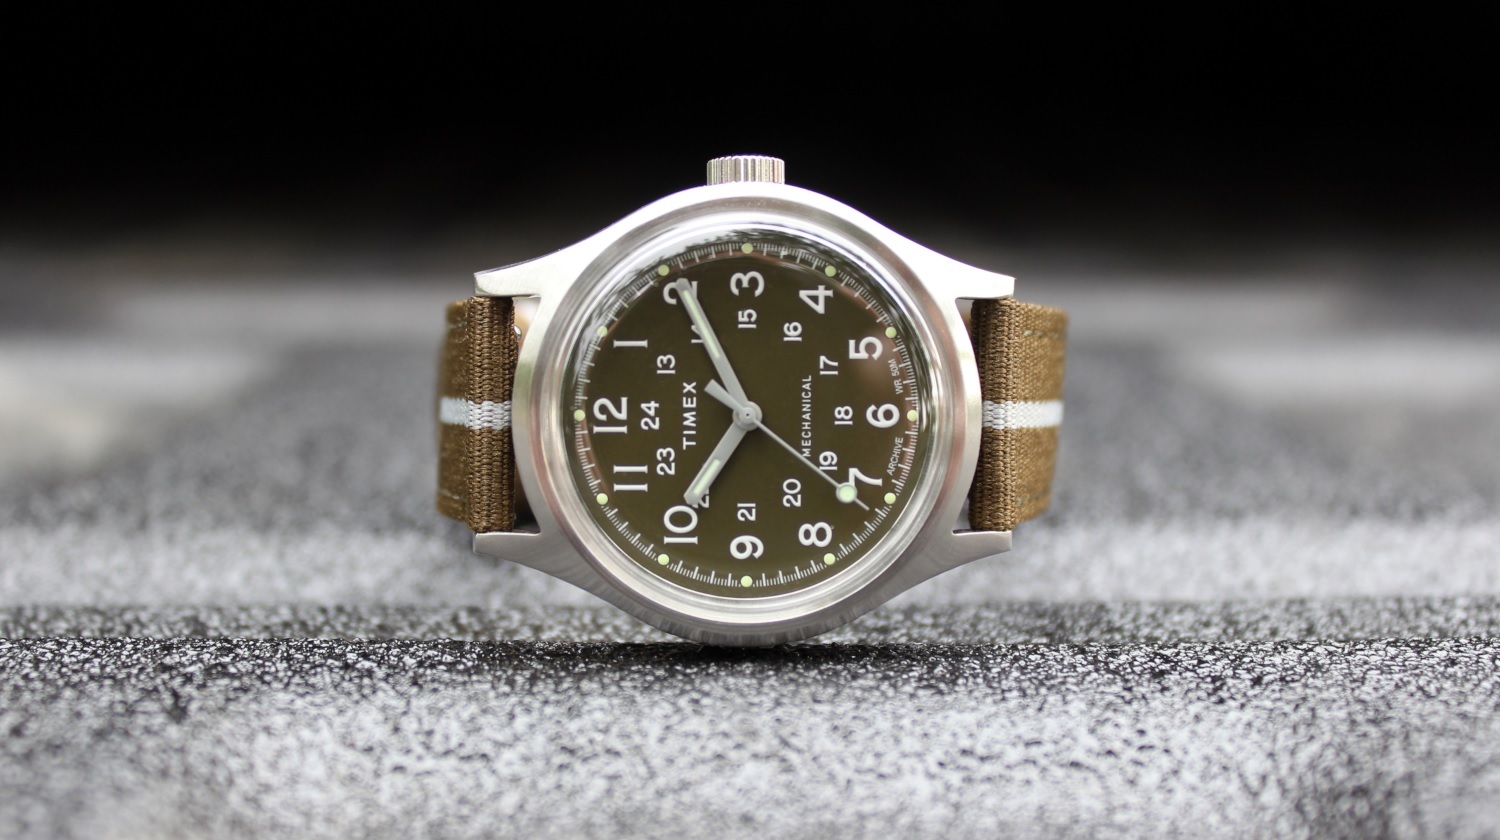 In Review: The Timex MK1 Mechanical 36mm Field Watch